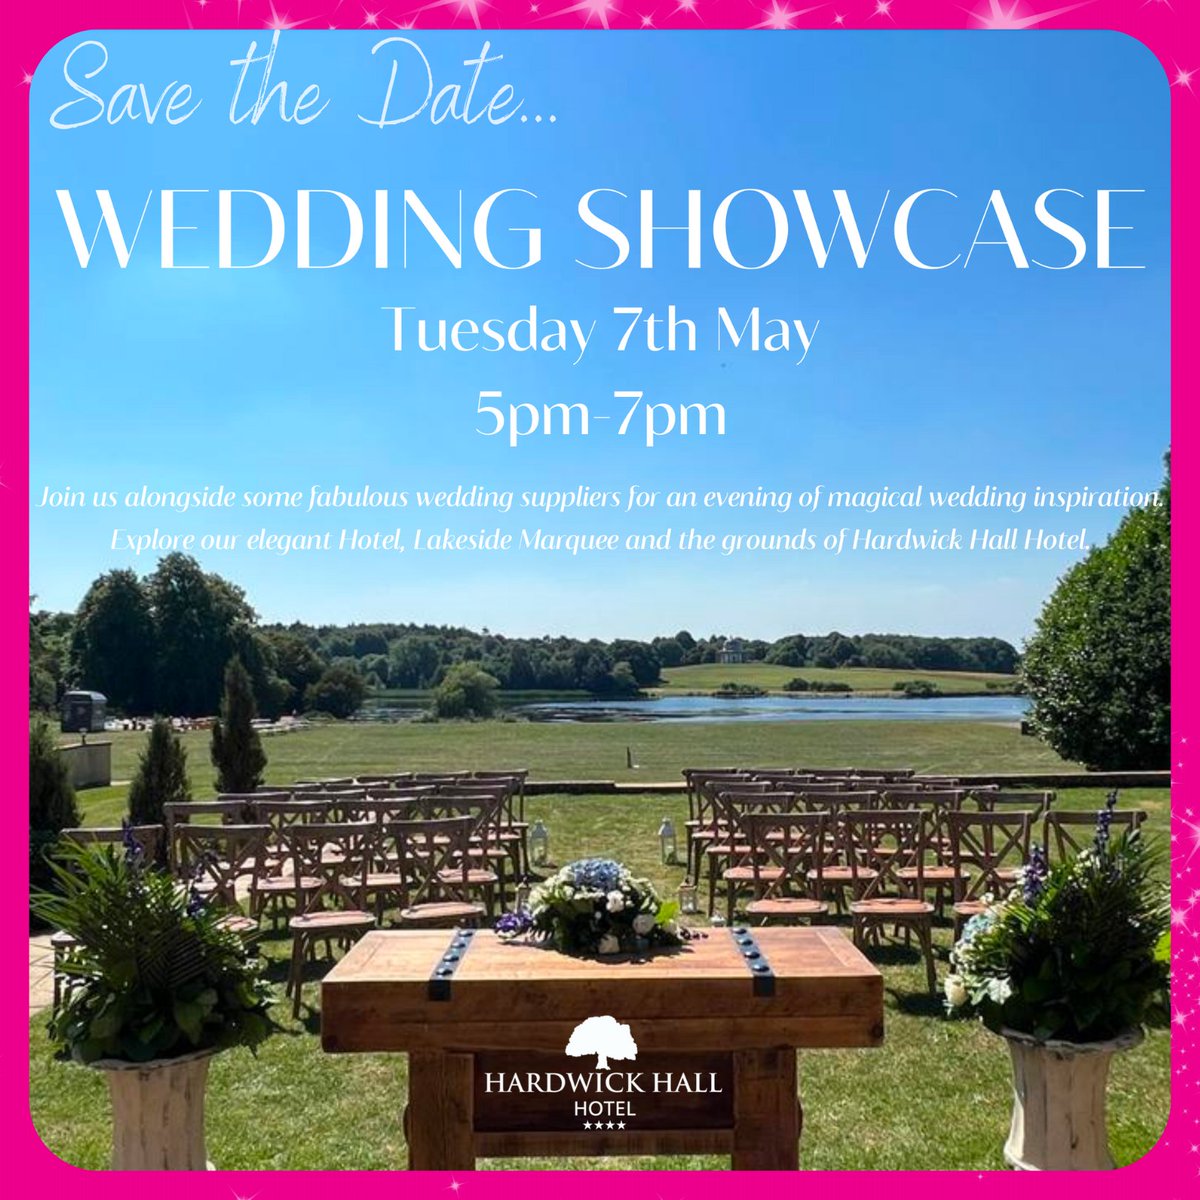 🎉 Ready to tie the knot? 💍 Join us at @HardwickHHotel's wedding showcase on 7th May, 5-7pm! Our entertainment experts will make your big day unforgettable! 💕 Don't miss out on this chance to plan your dream wedding! 💒 #WeddingShowcase #SayIDo #WeddingGoals #WeddingPros